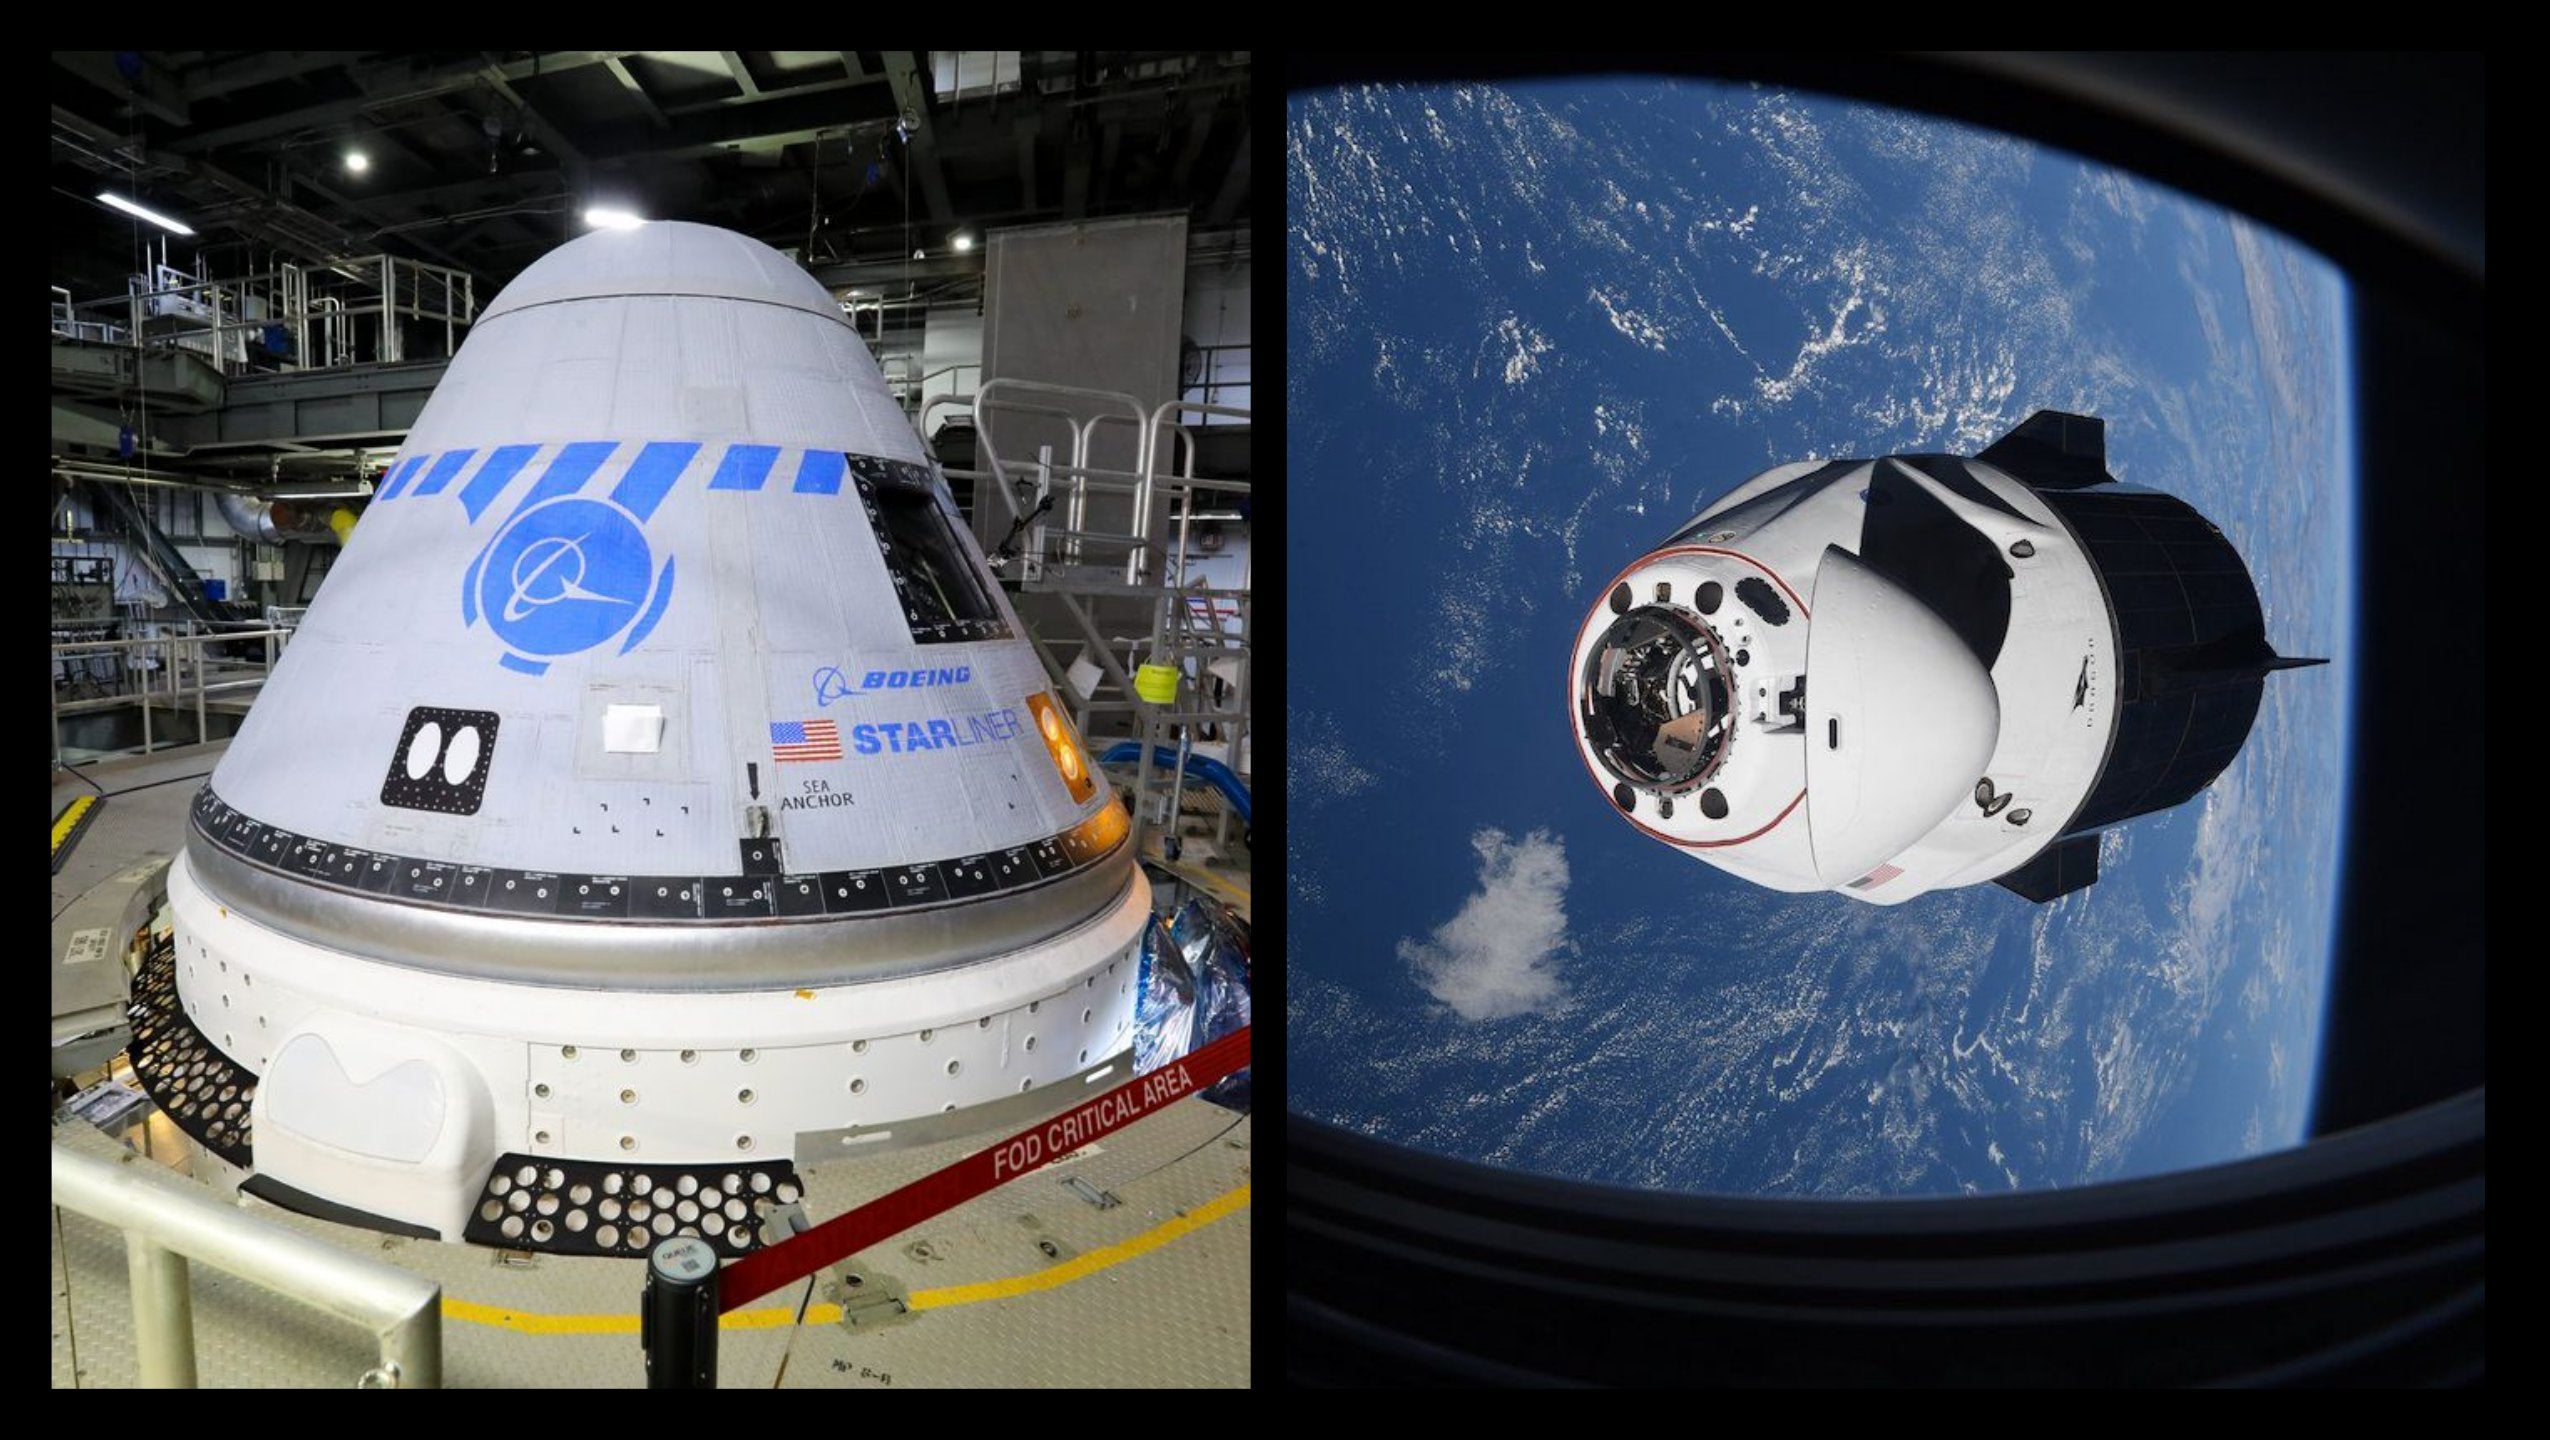 NASA Will Purchase Additional Crewed Flights Aboard SpaceX Crew Dragon Due To Boeing Starliner Delays